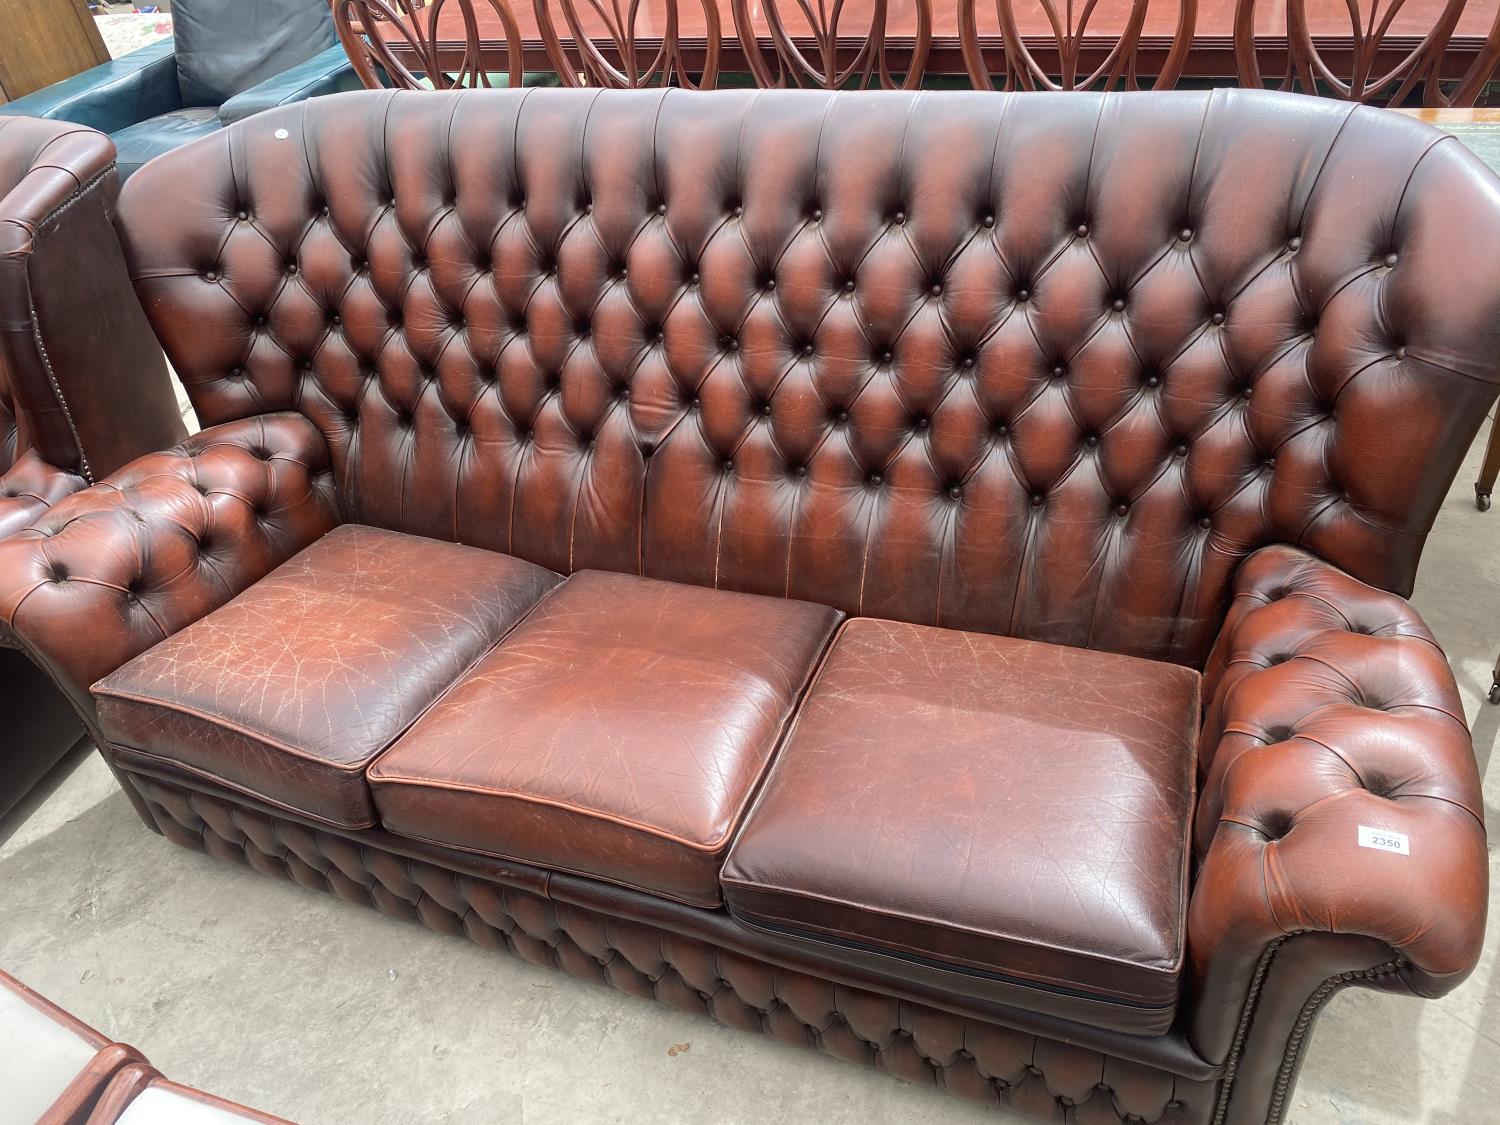 AN OXBLOOD 3 SEATER BUTTON BACK SETTEE